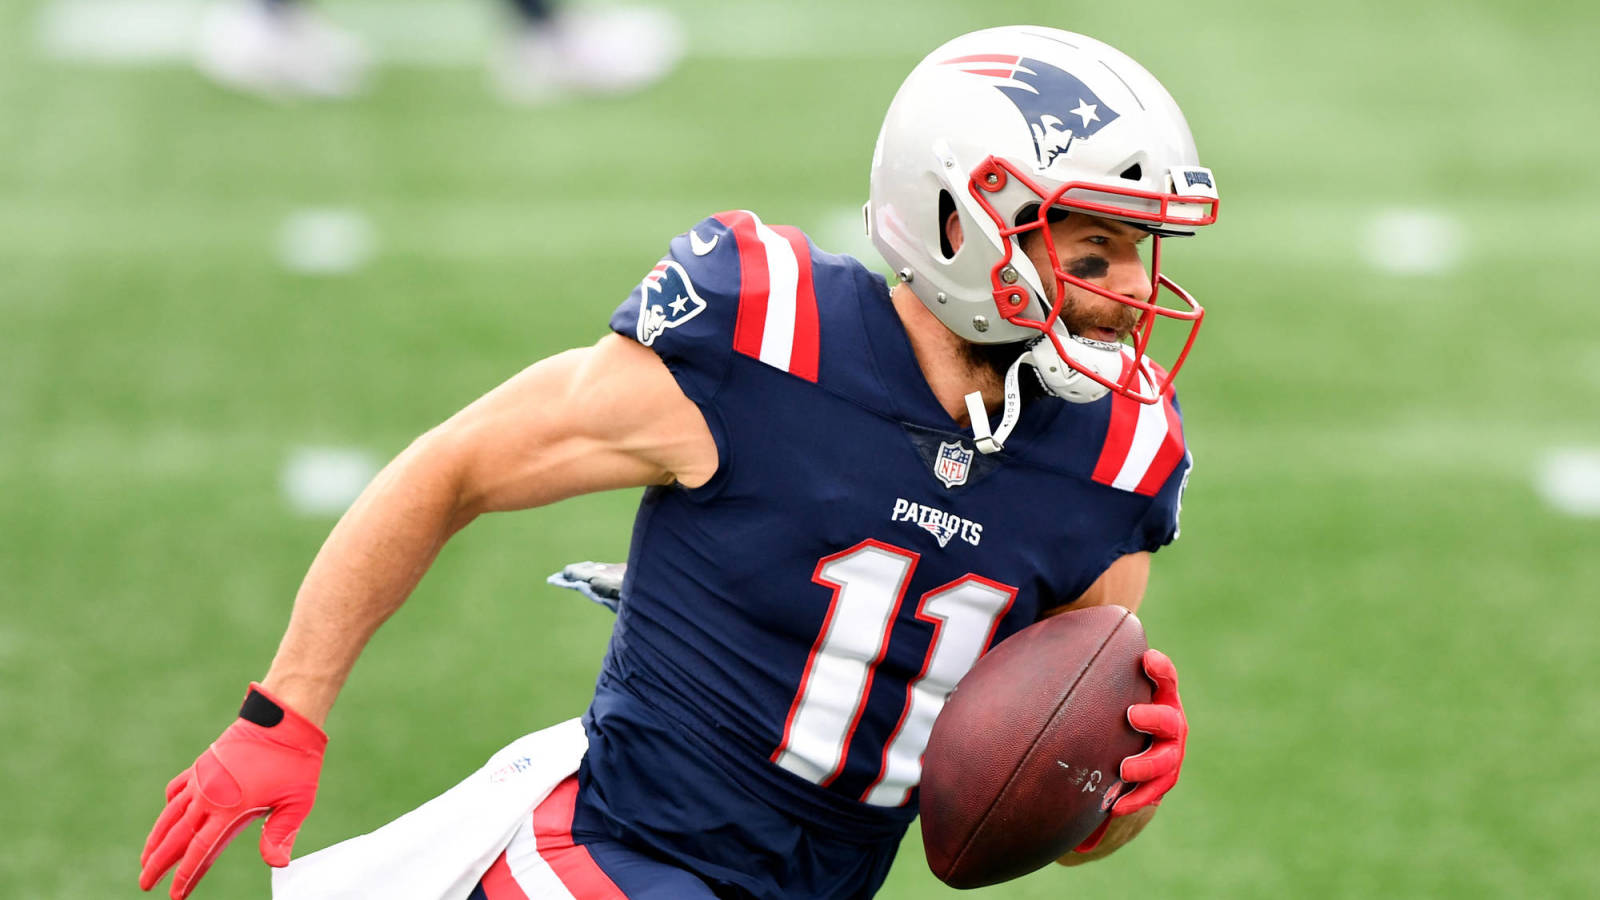 Julian Edelman responds to talk of him joining the Buccaneers